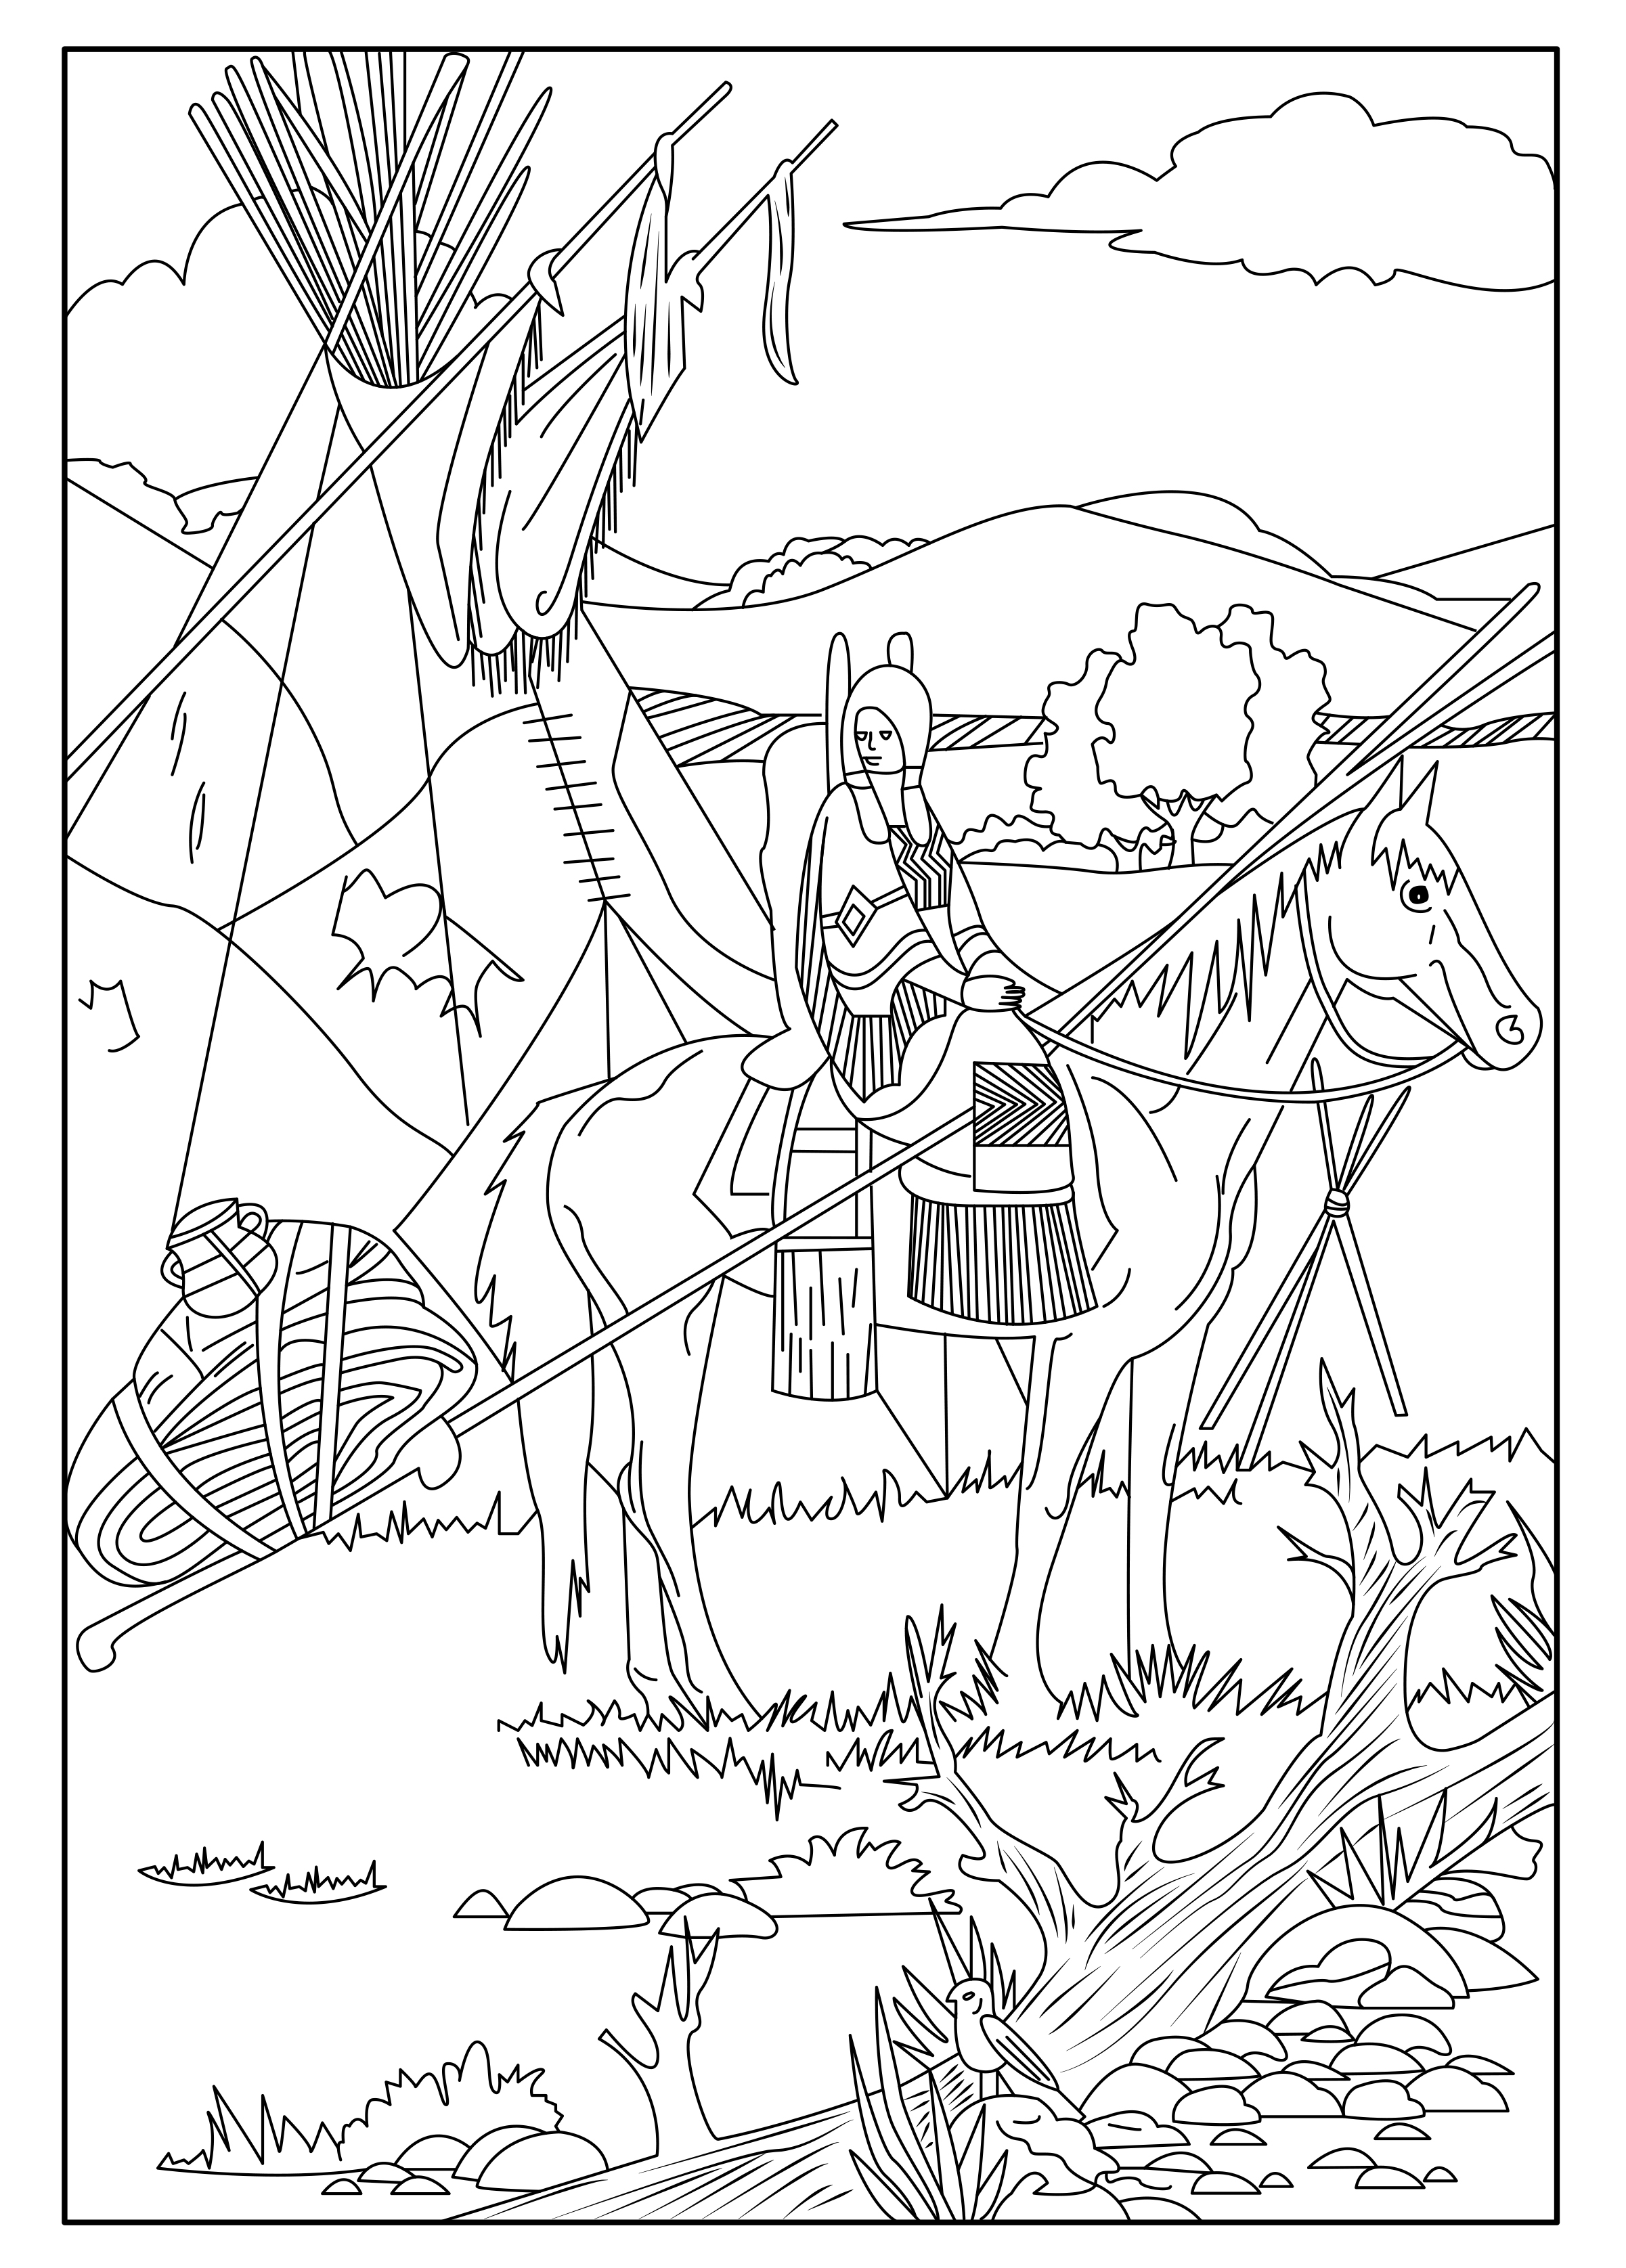 Download Native american celine - Native American Adult Coloring Pages